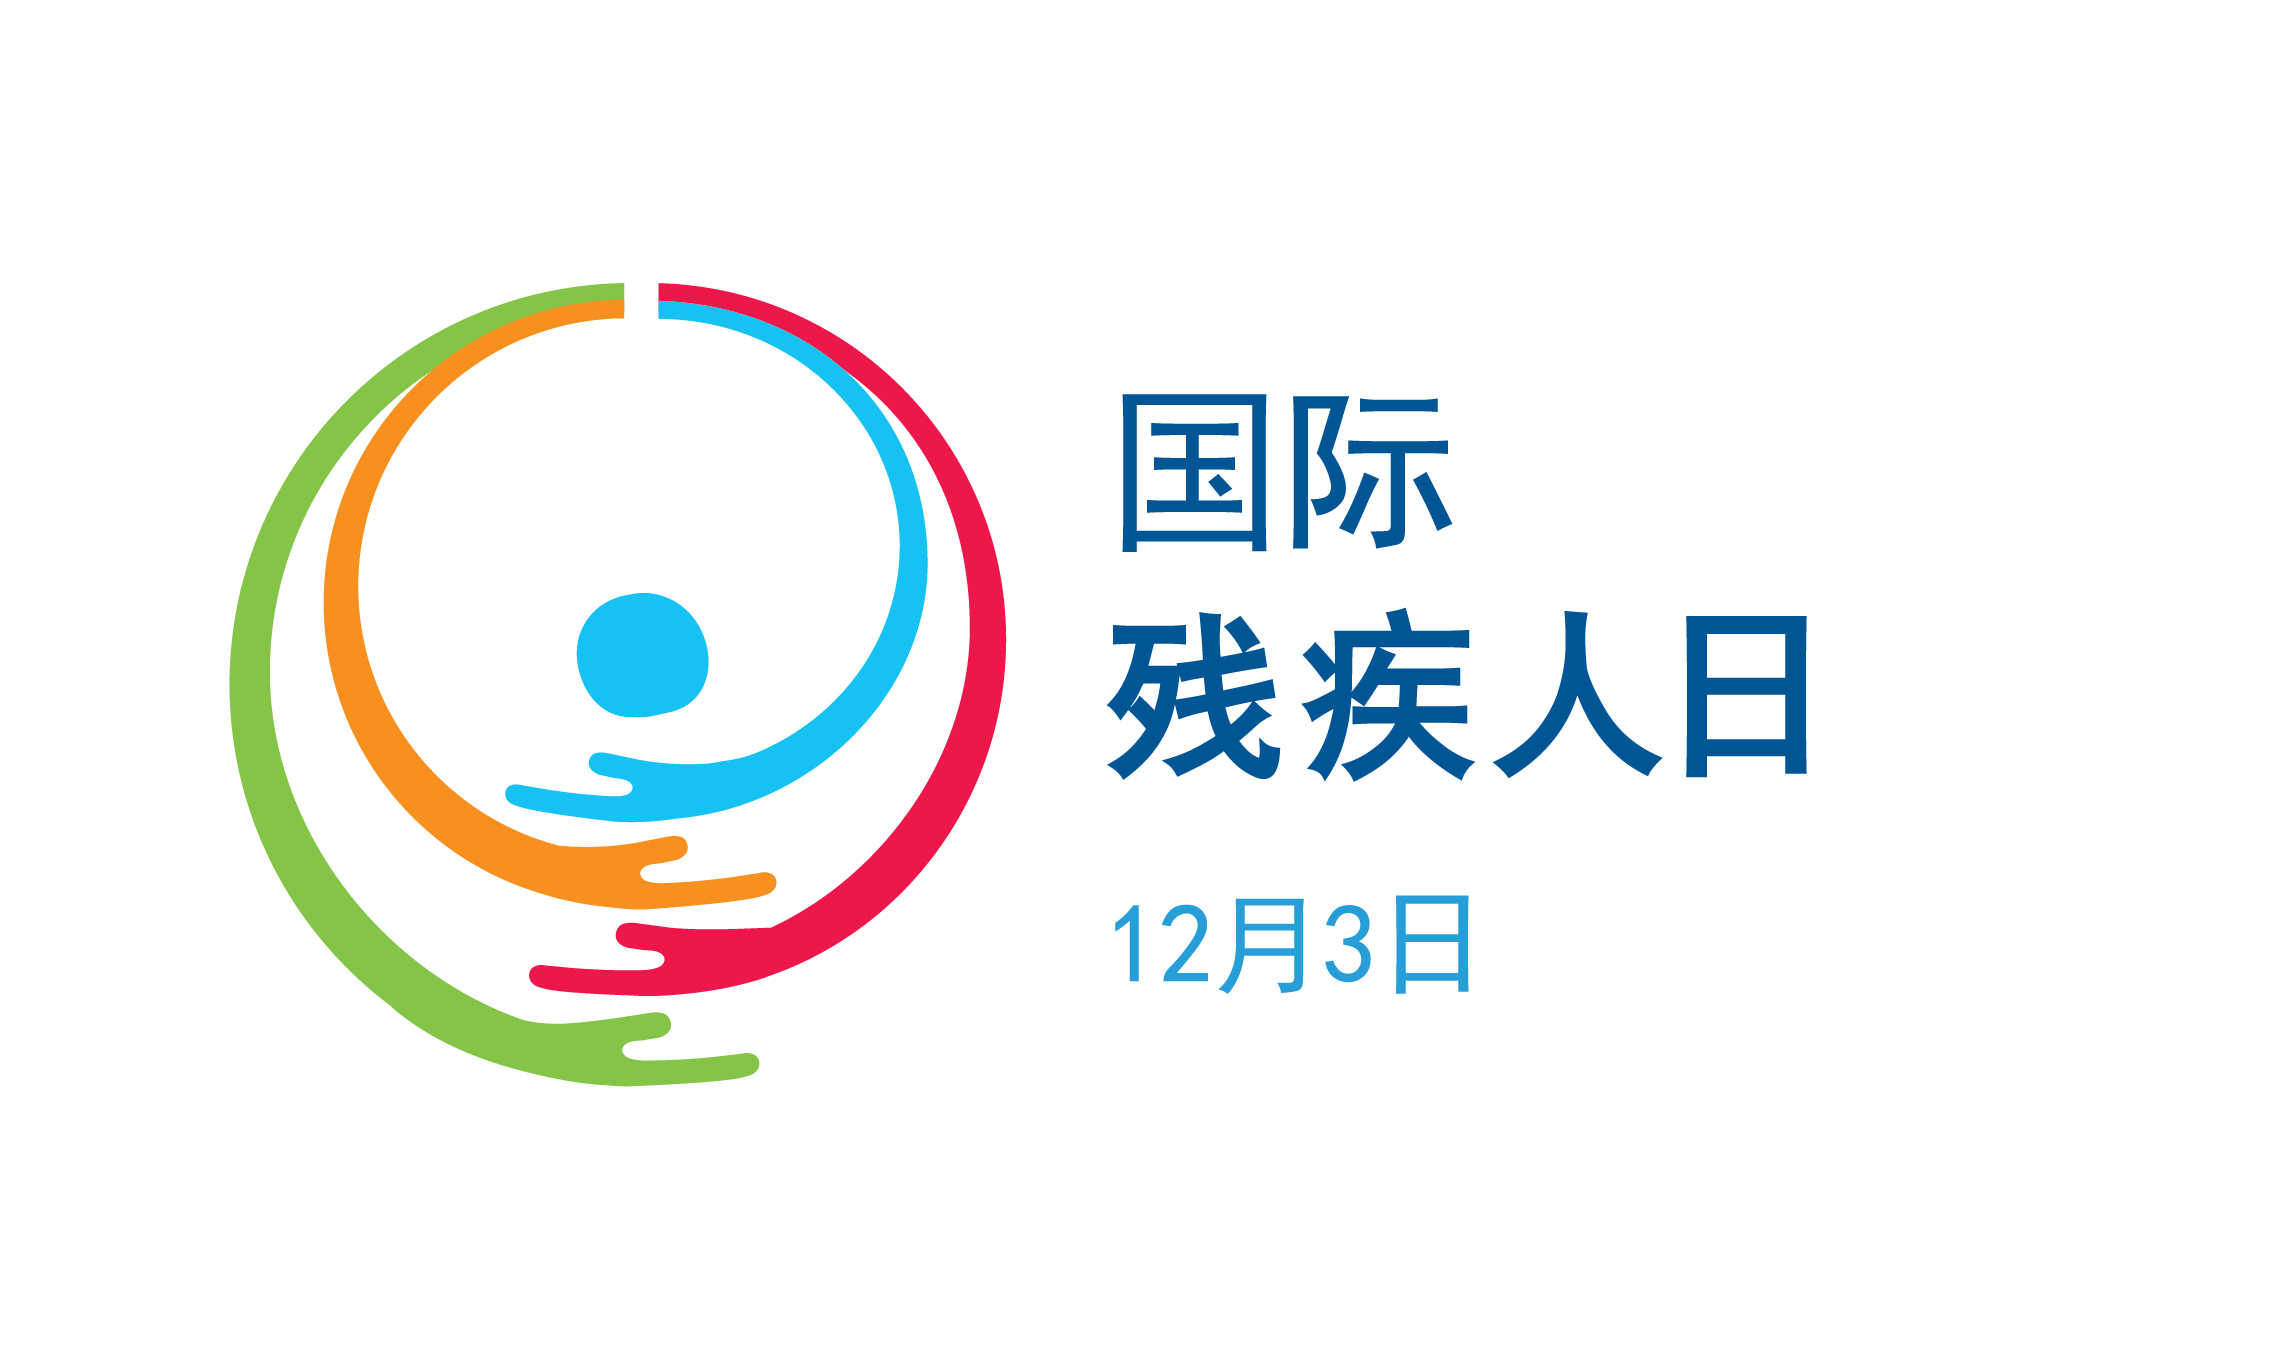 Logo of the International Day of Persons with Disabilities